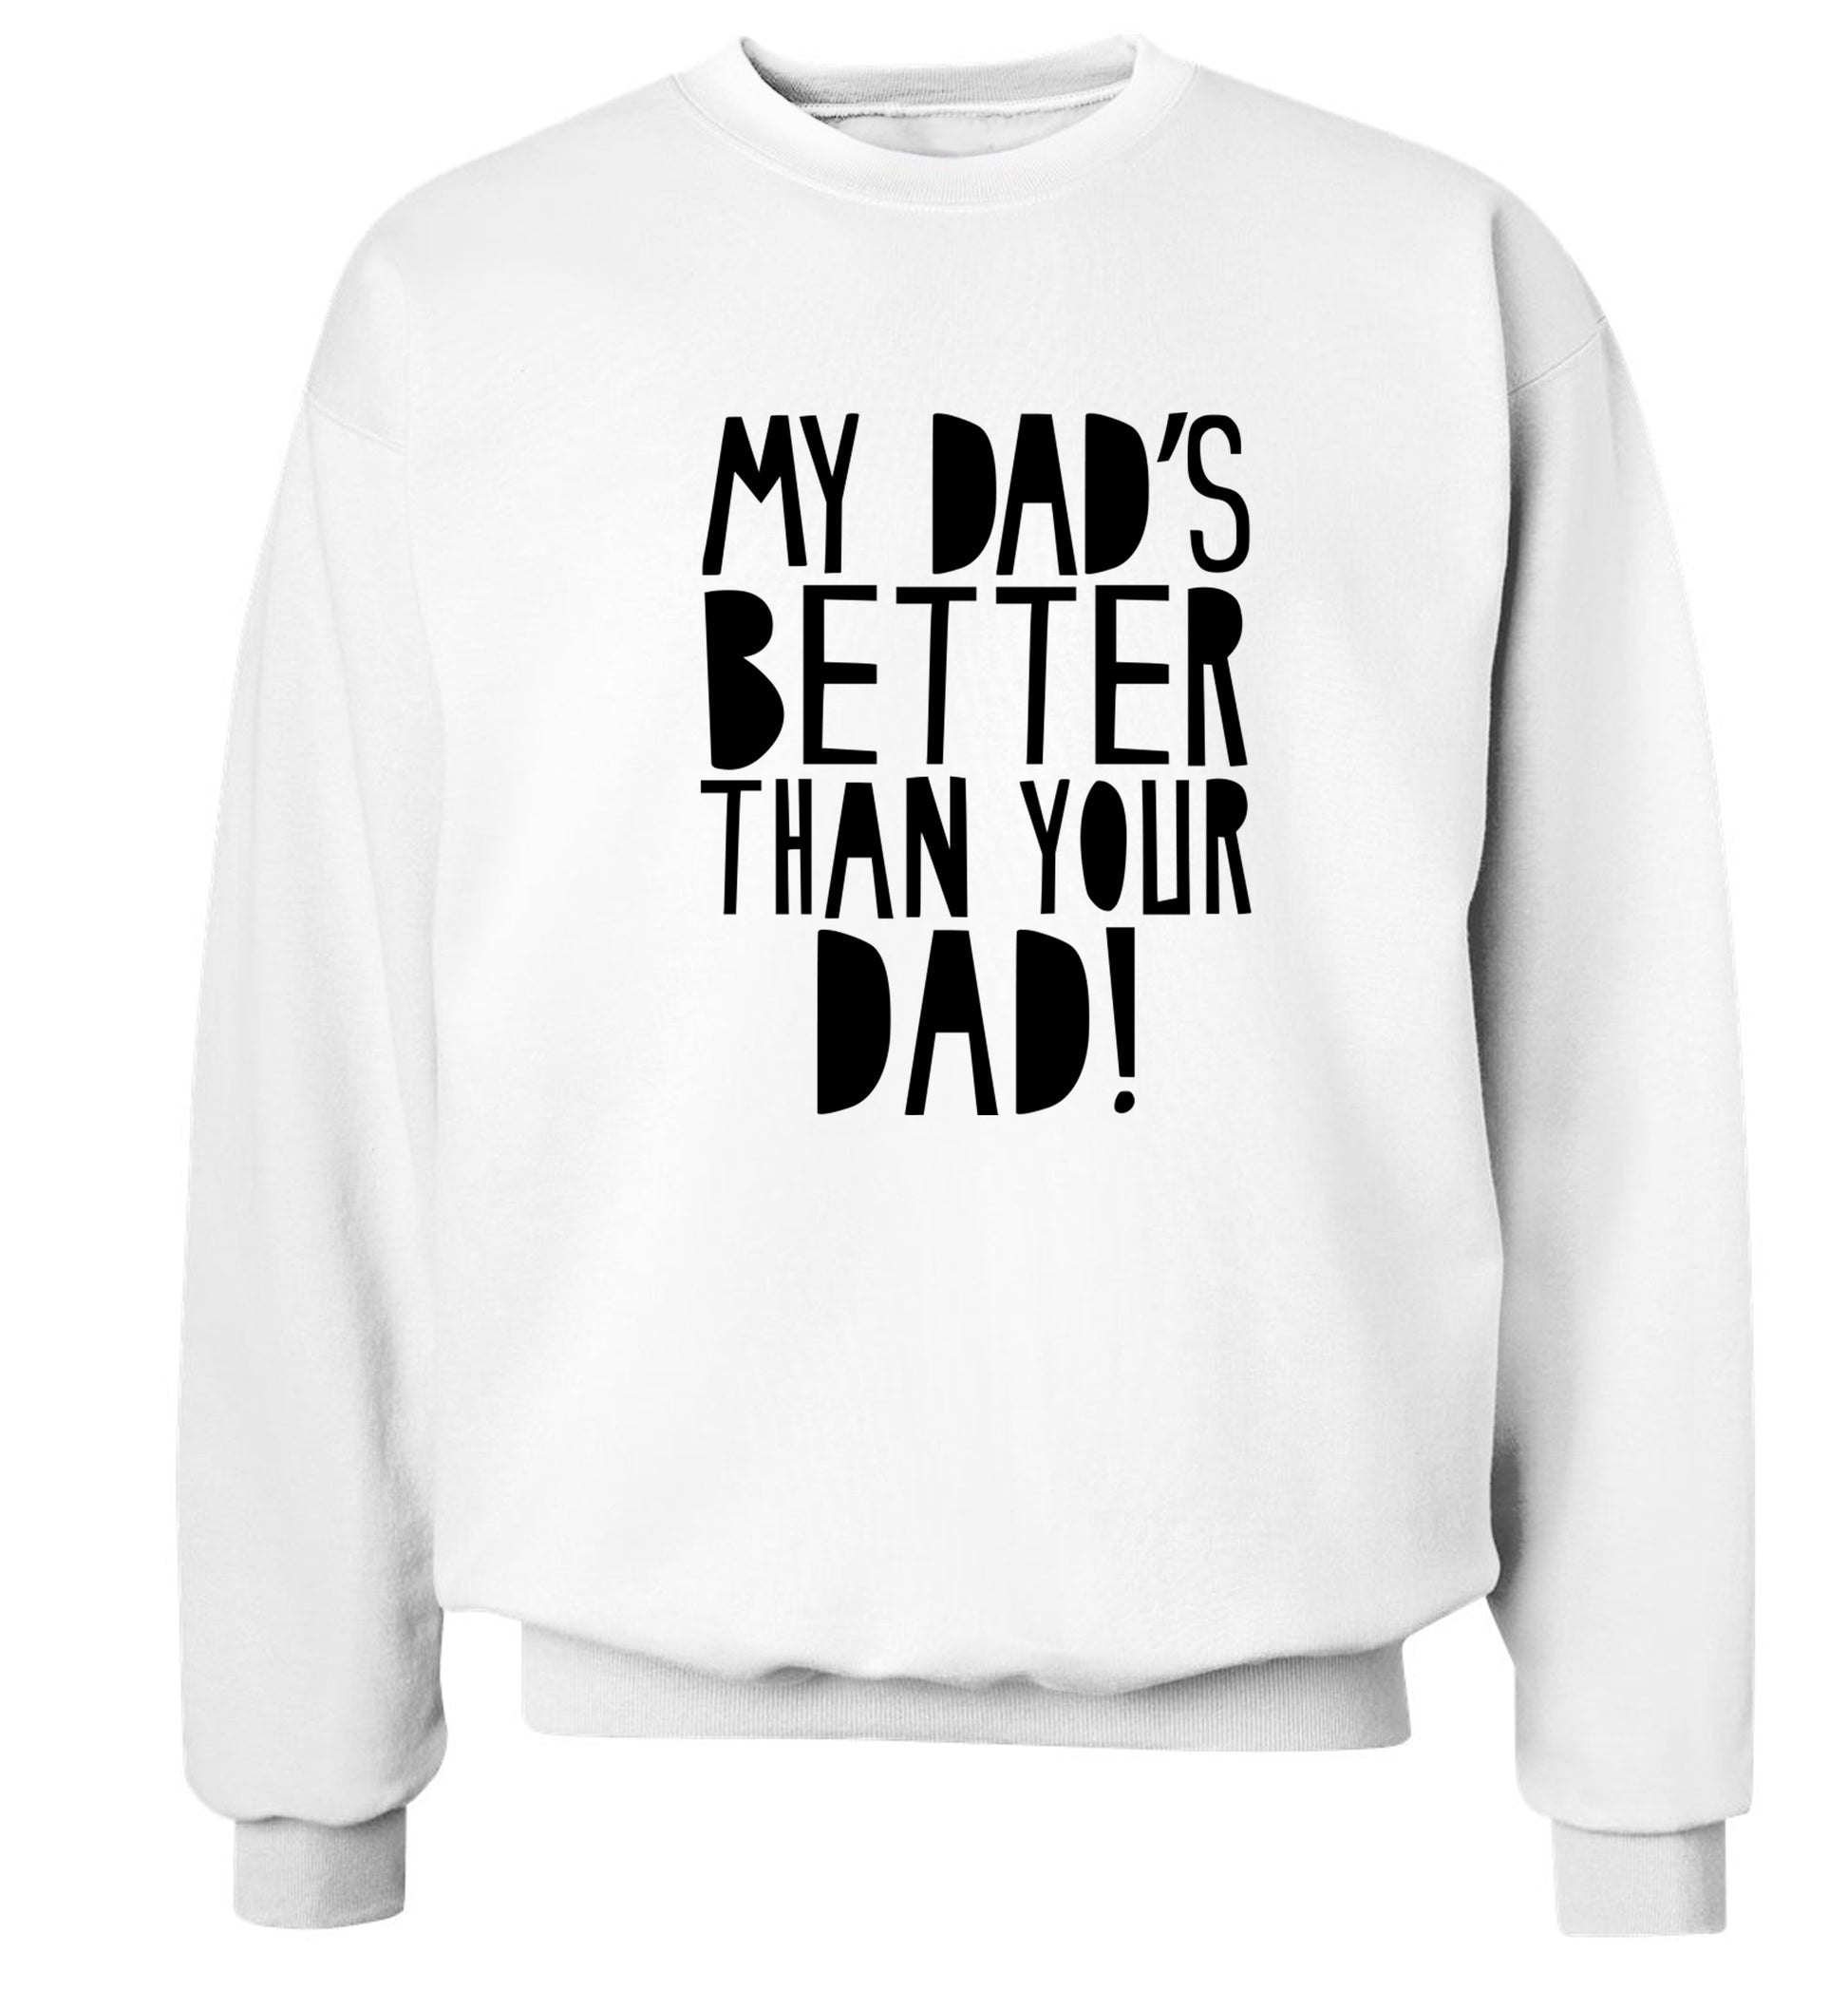 My dad's better than your dad Adult's unisex white Sweater 2XL